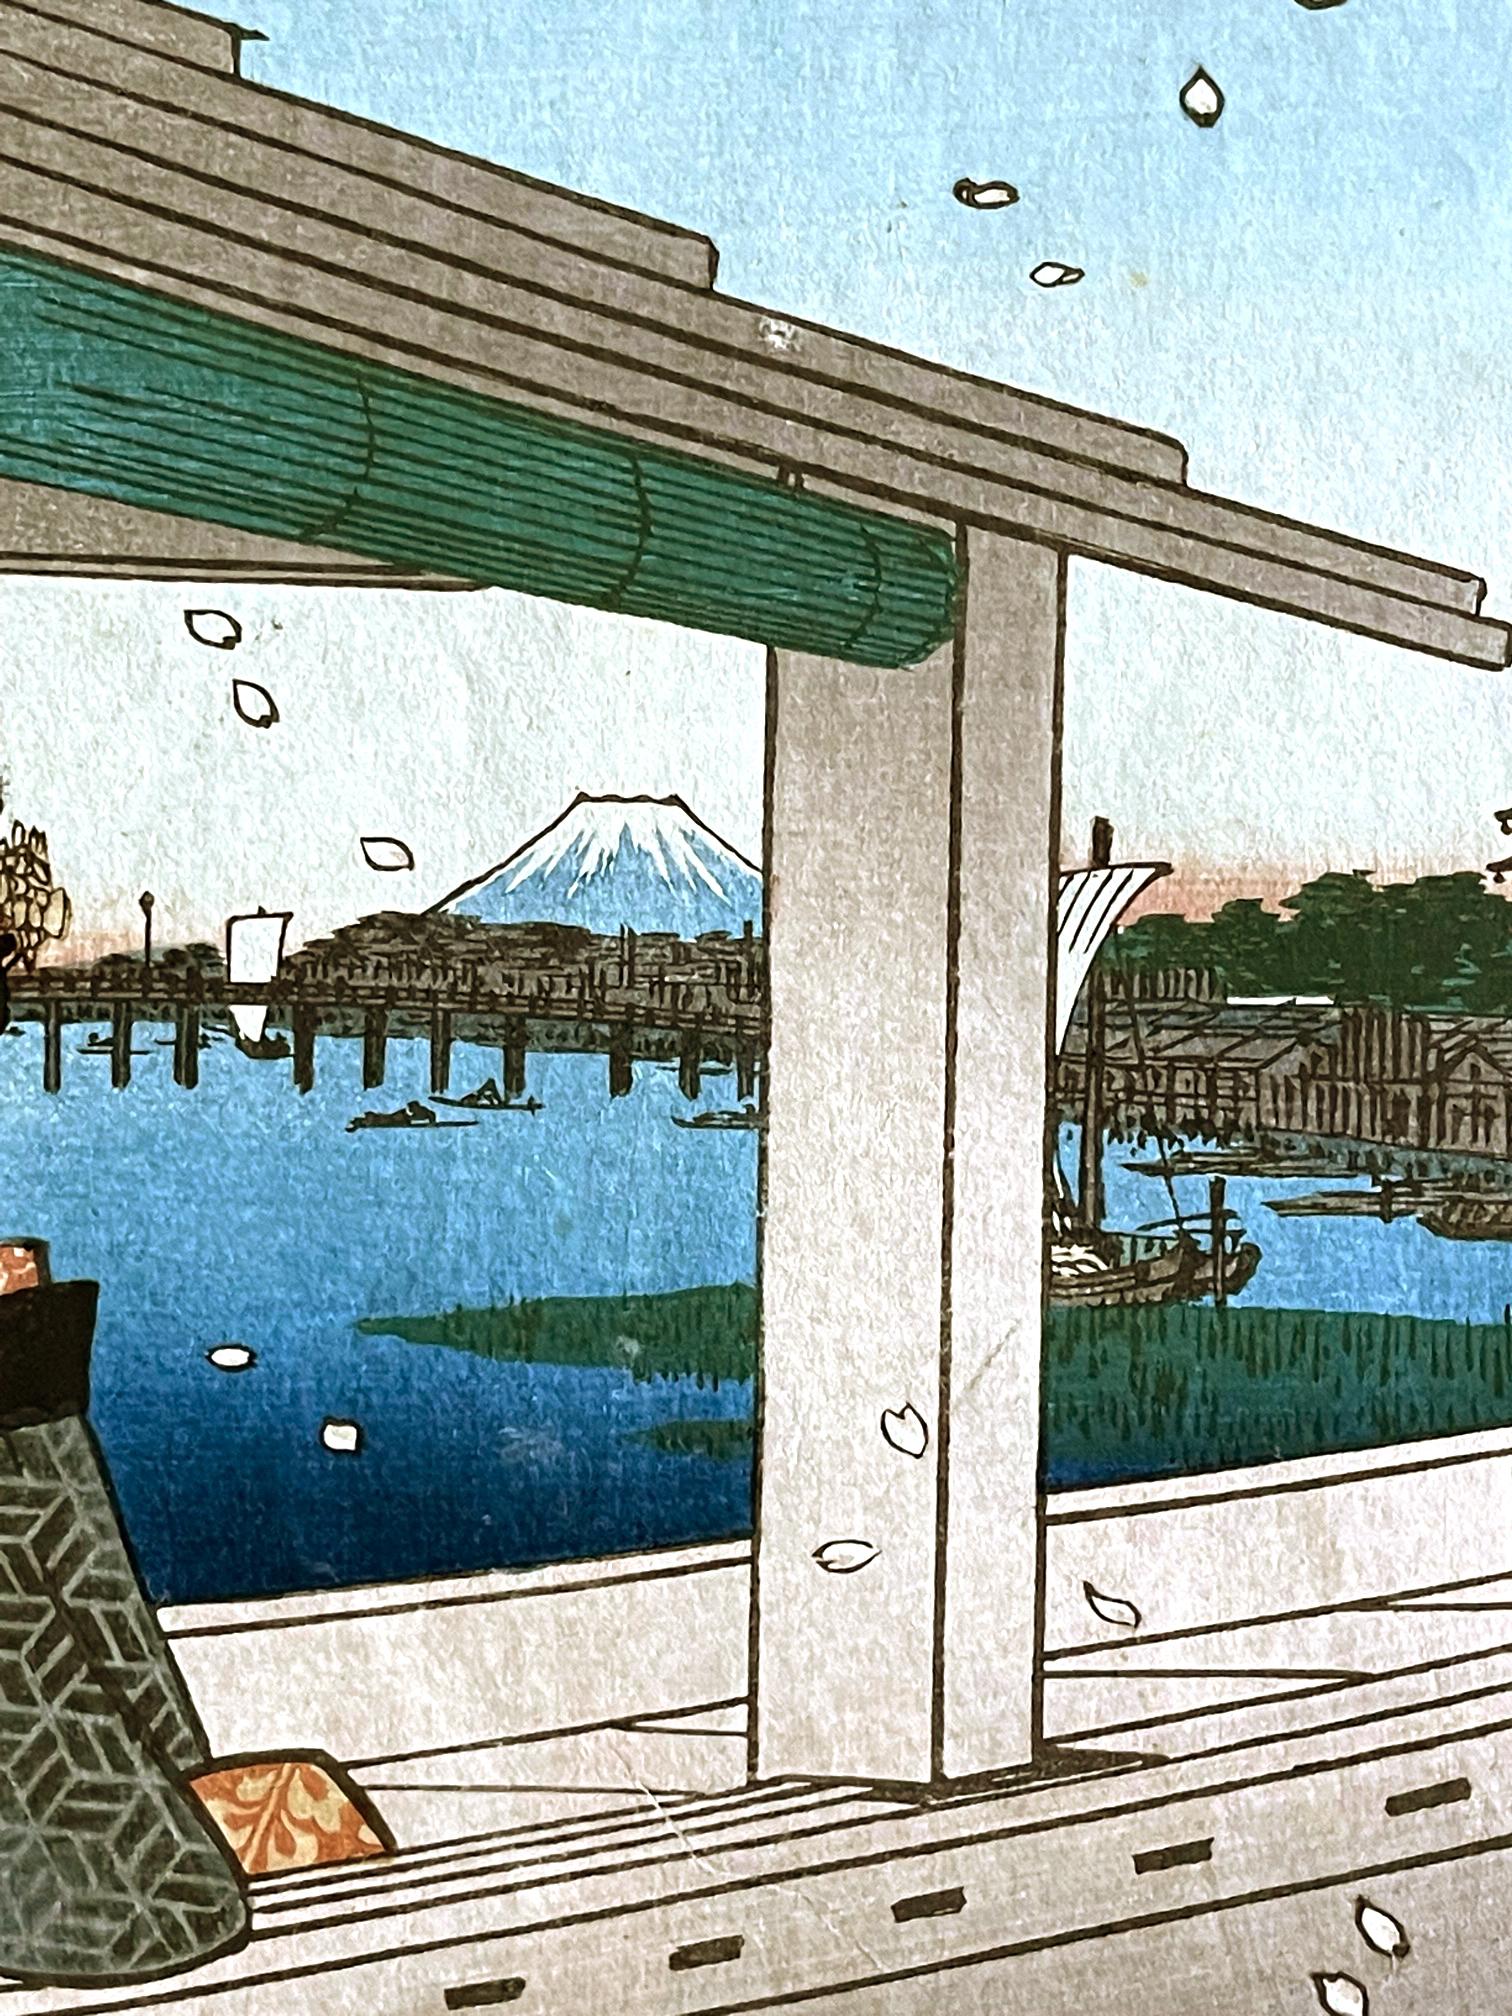 Mid-19th Century Japanese Woodblock Print One Hundred Famous Views of Edo by Utagawa Hiroshige For Sale